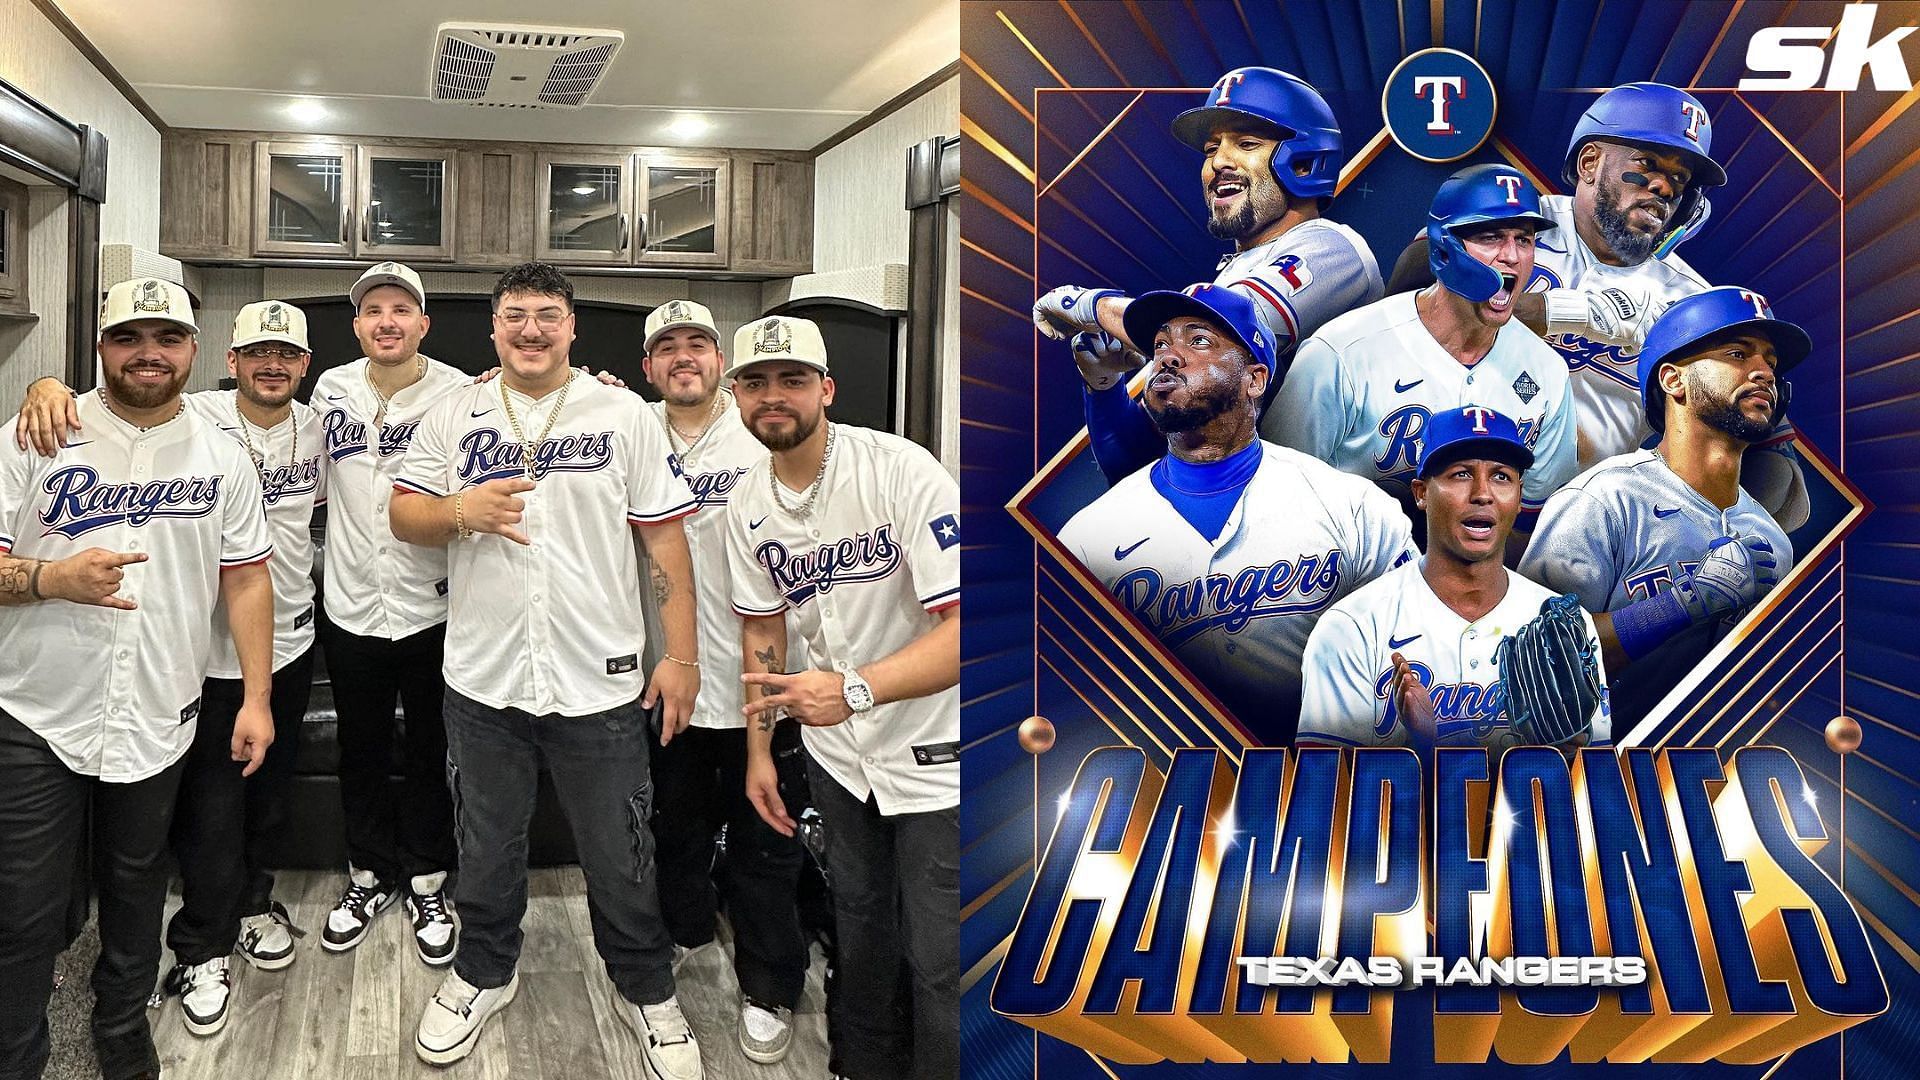 Mexican-American band Grupo Frontera shows team spirit by rocking Rangers jersey at 2023 tour concert